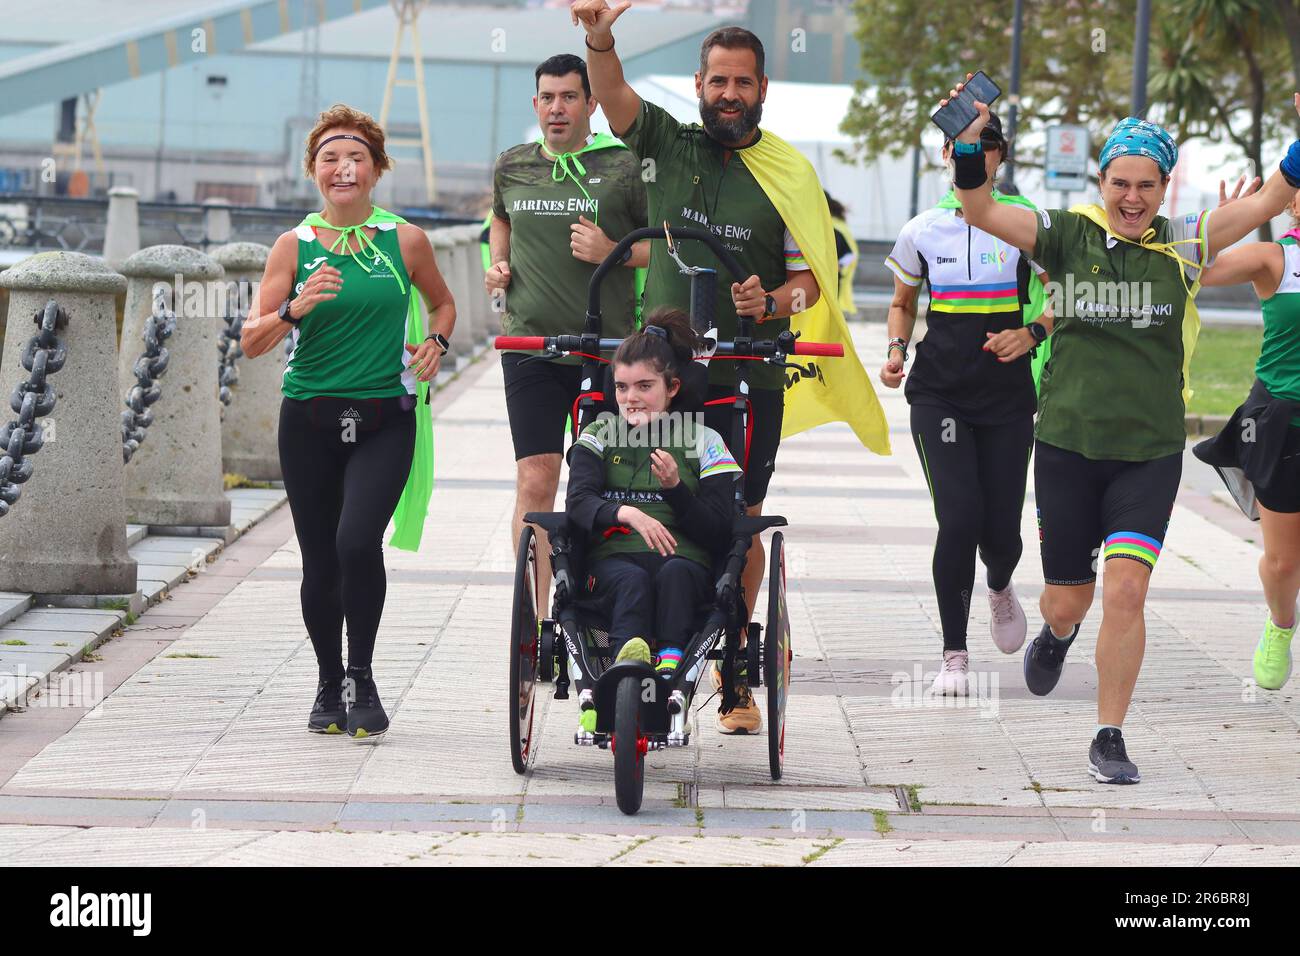 Raising awareness for the Marines ENKI Charity Run giving children with disabilities the opportunity to participate in races with able bodied runners. Stock Photo